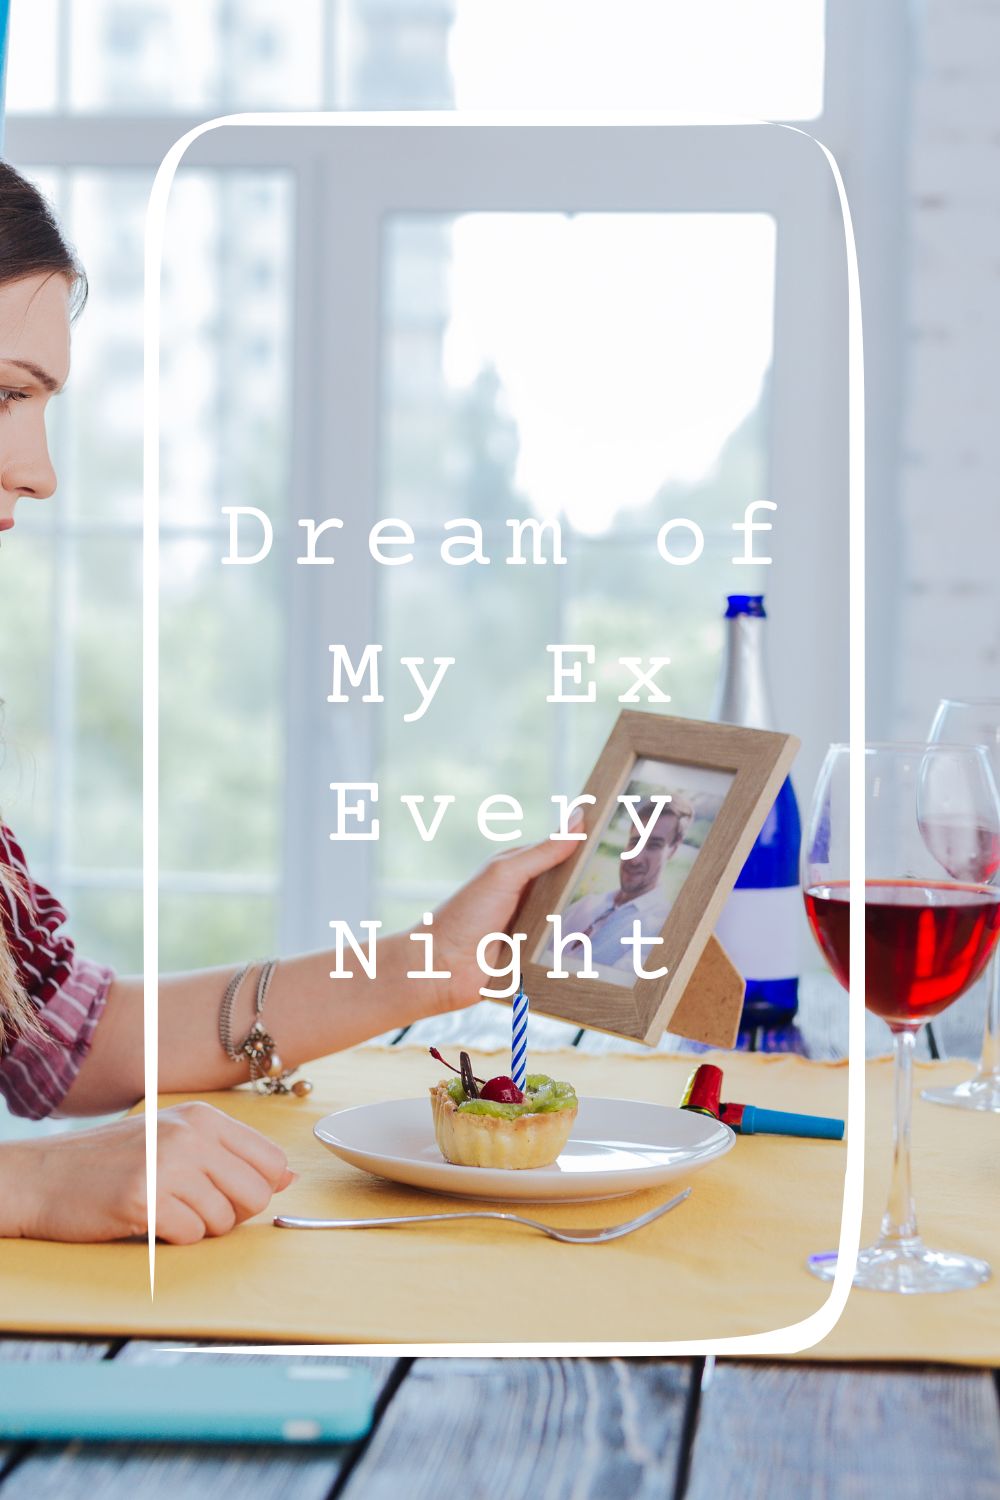 8 Dream of My Ex Every Night Meanings4